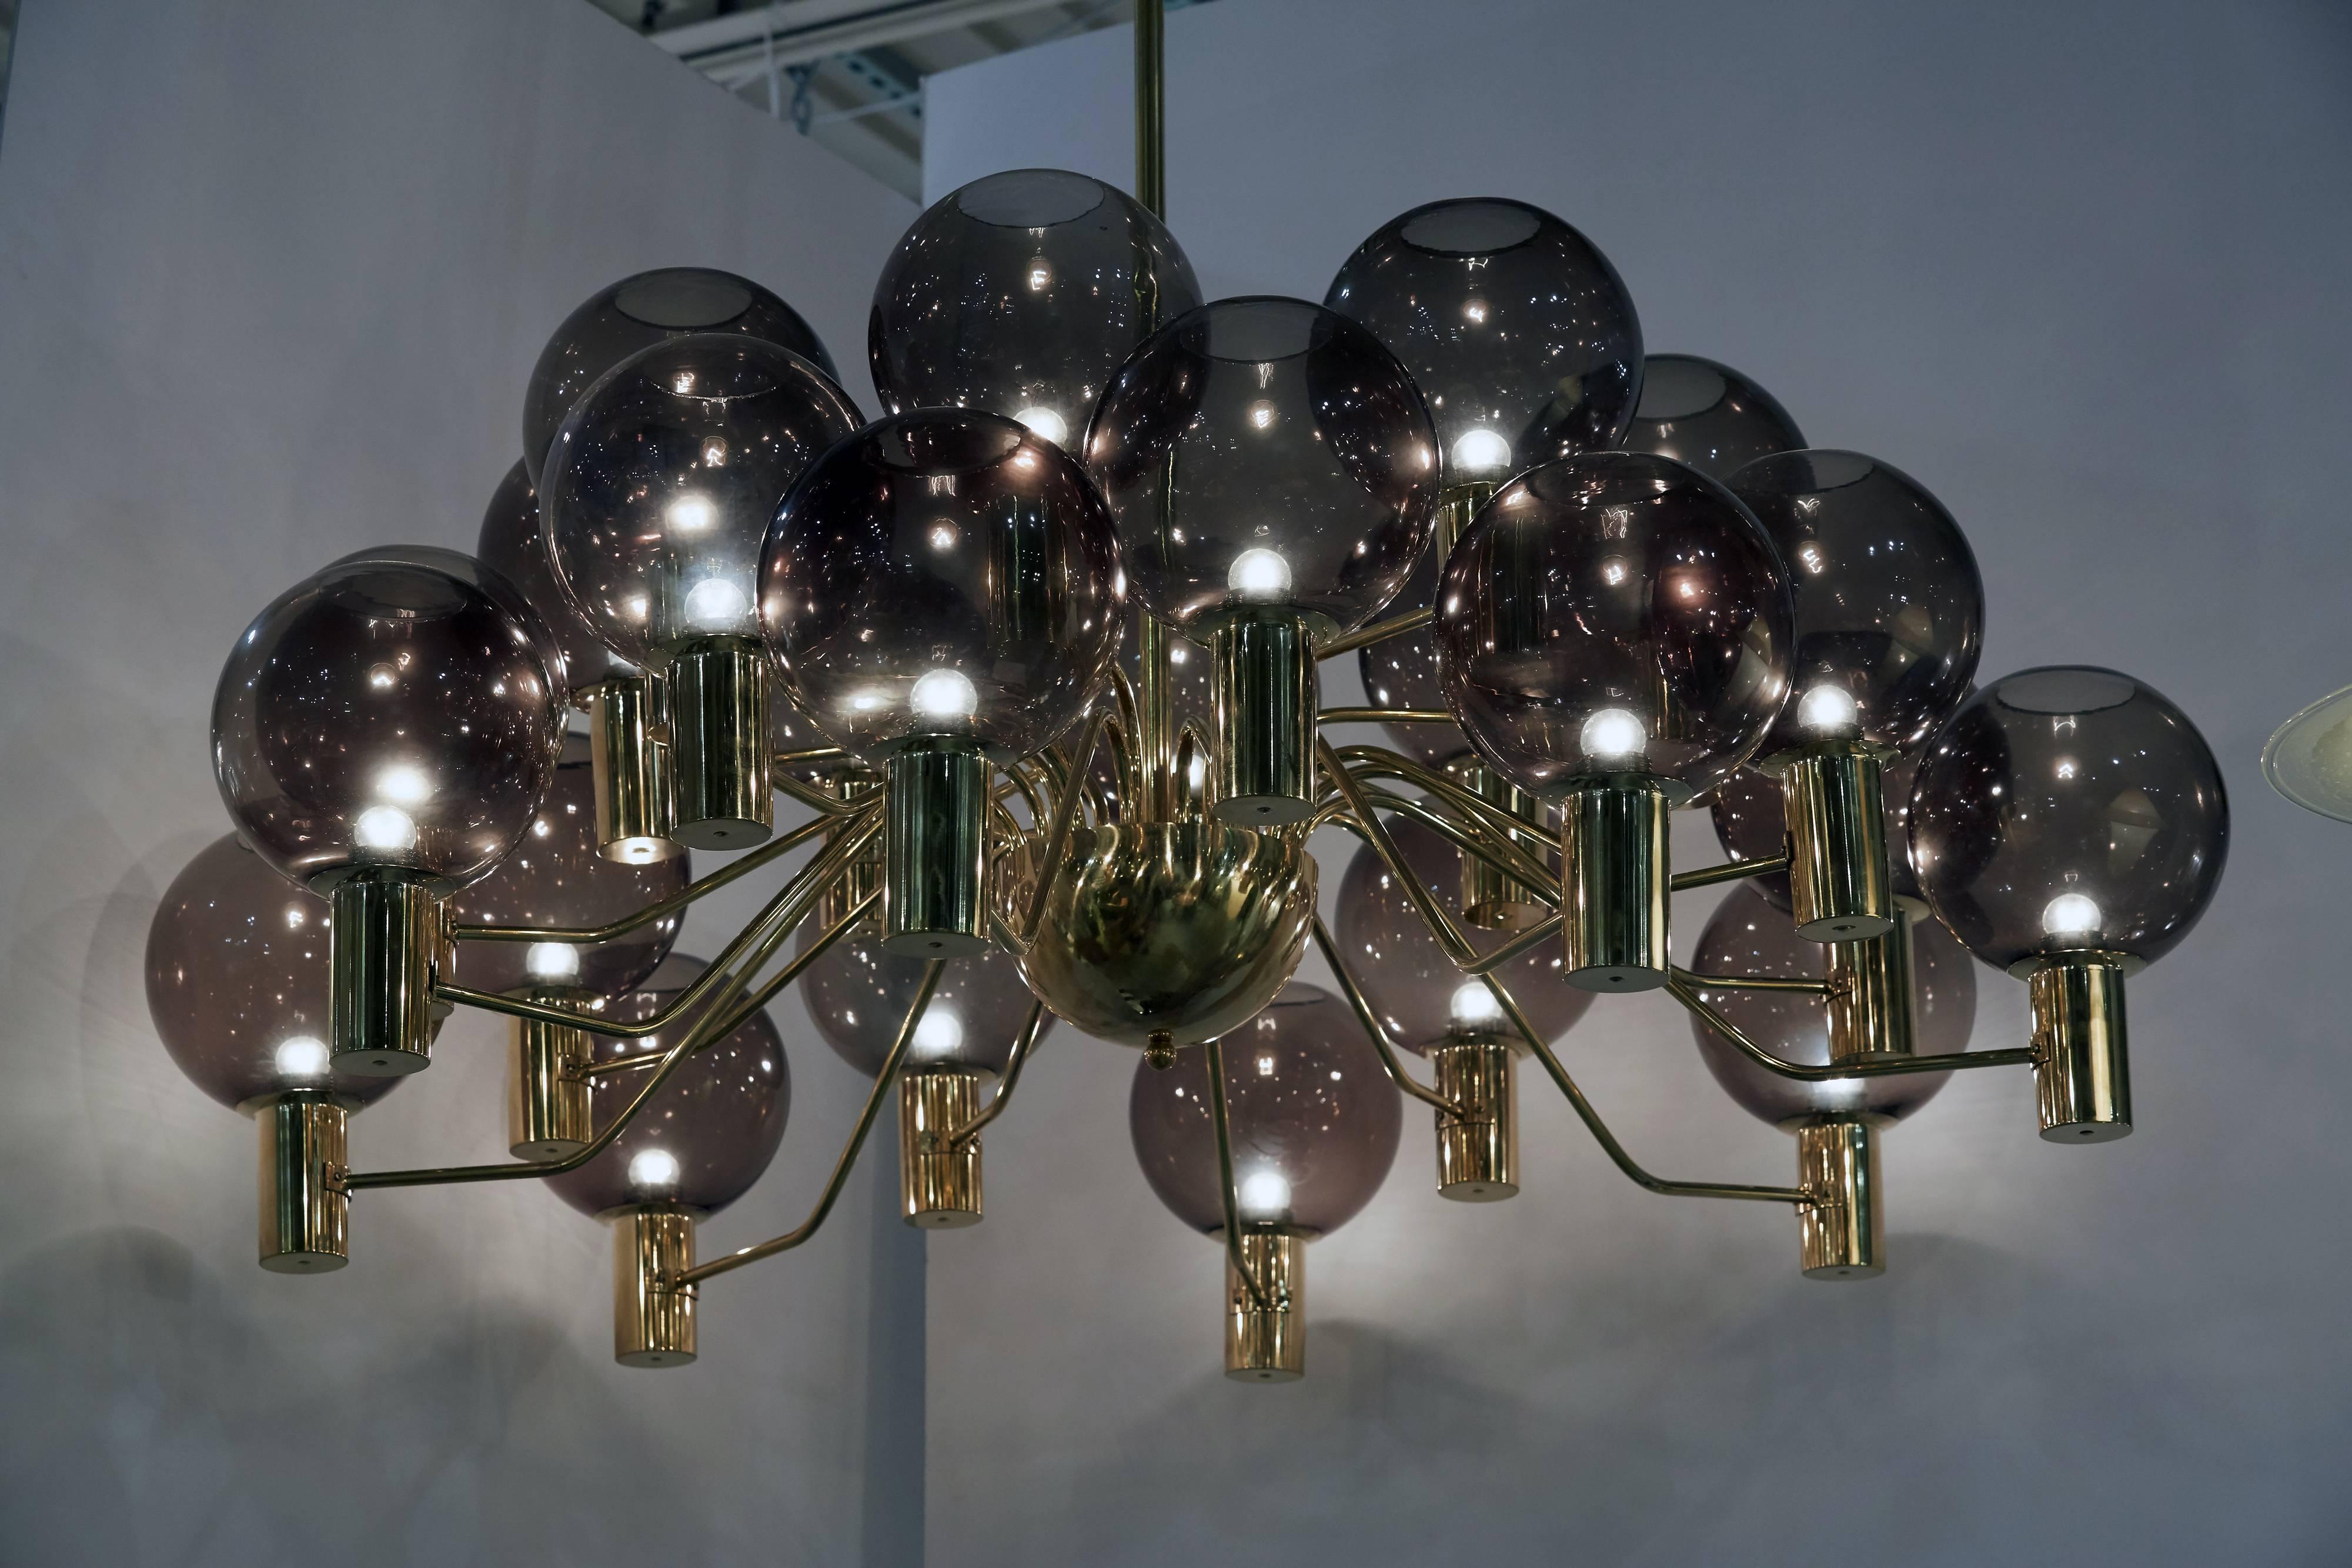 Large Swedish Mid-Century Modern Chandelier Attributed to Hans-Agne Jacobsson 1